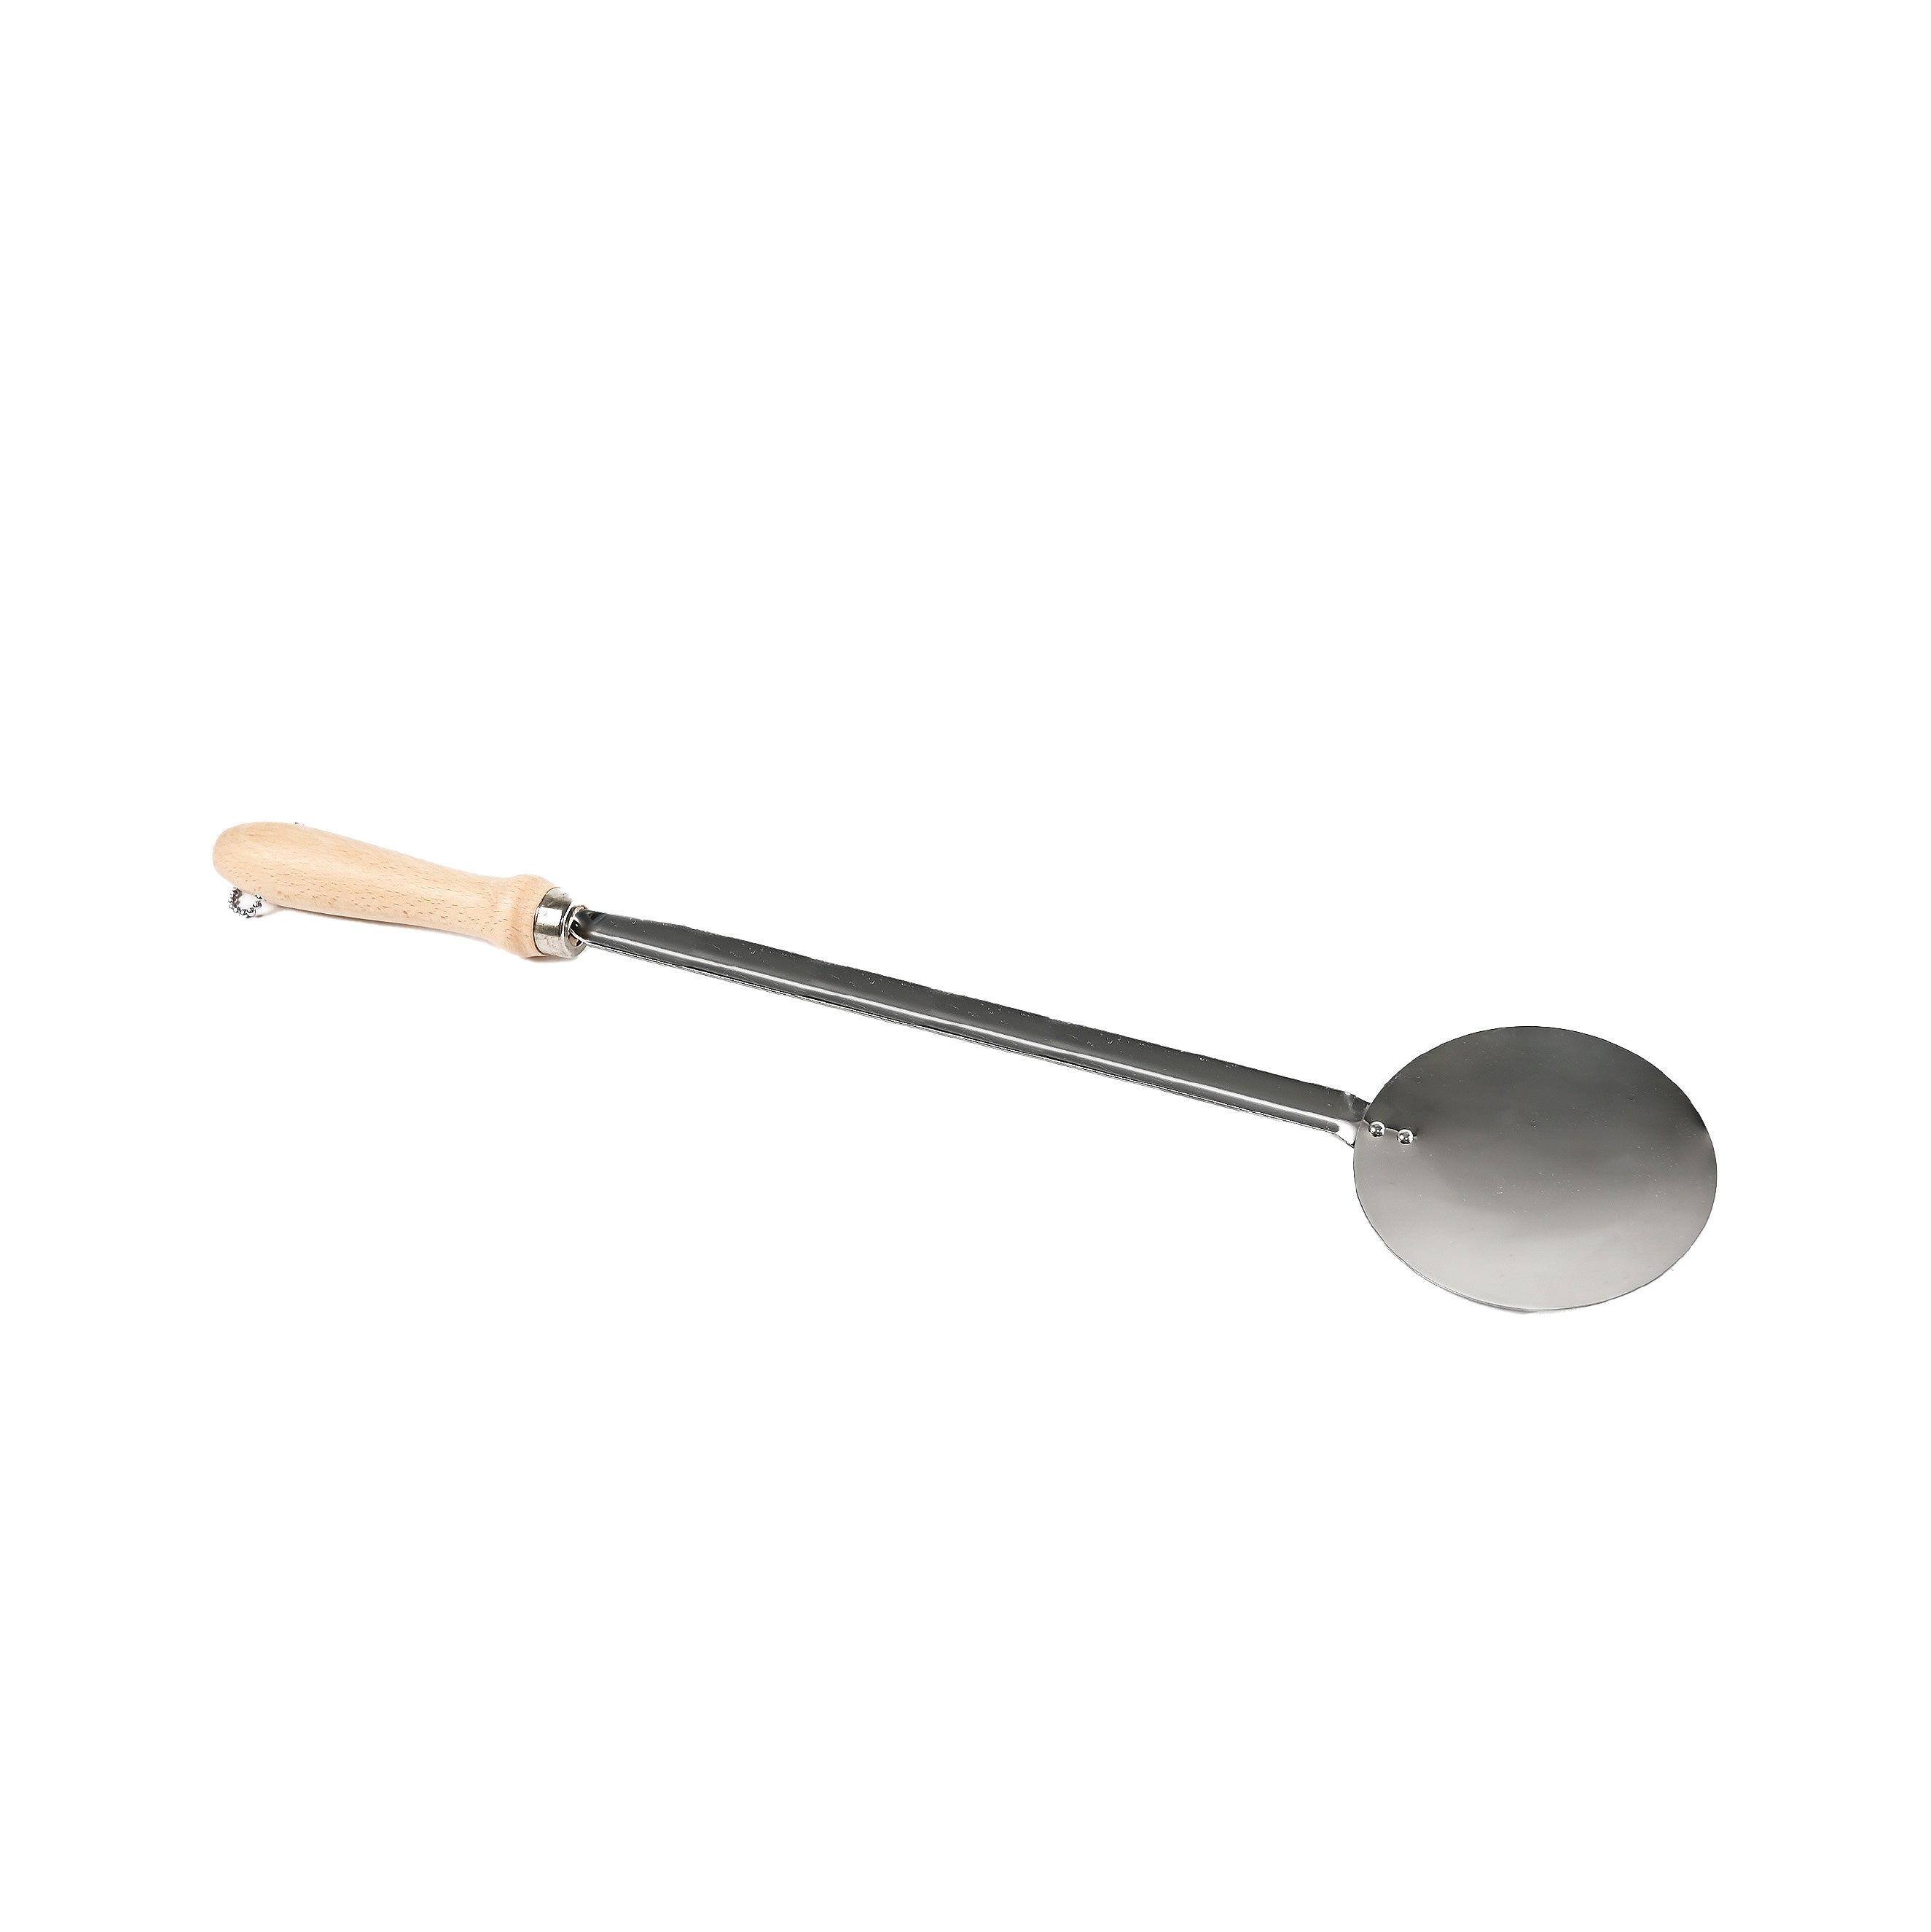 26 in Wok Spatula for Cooking